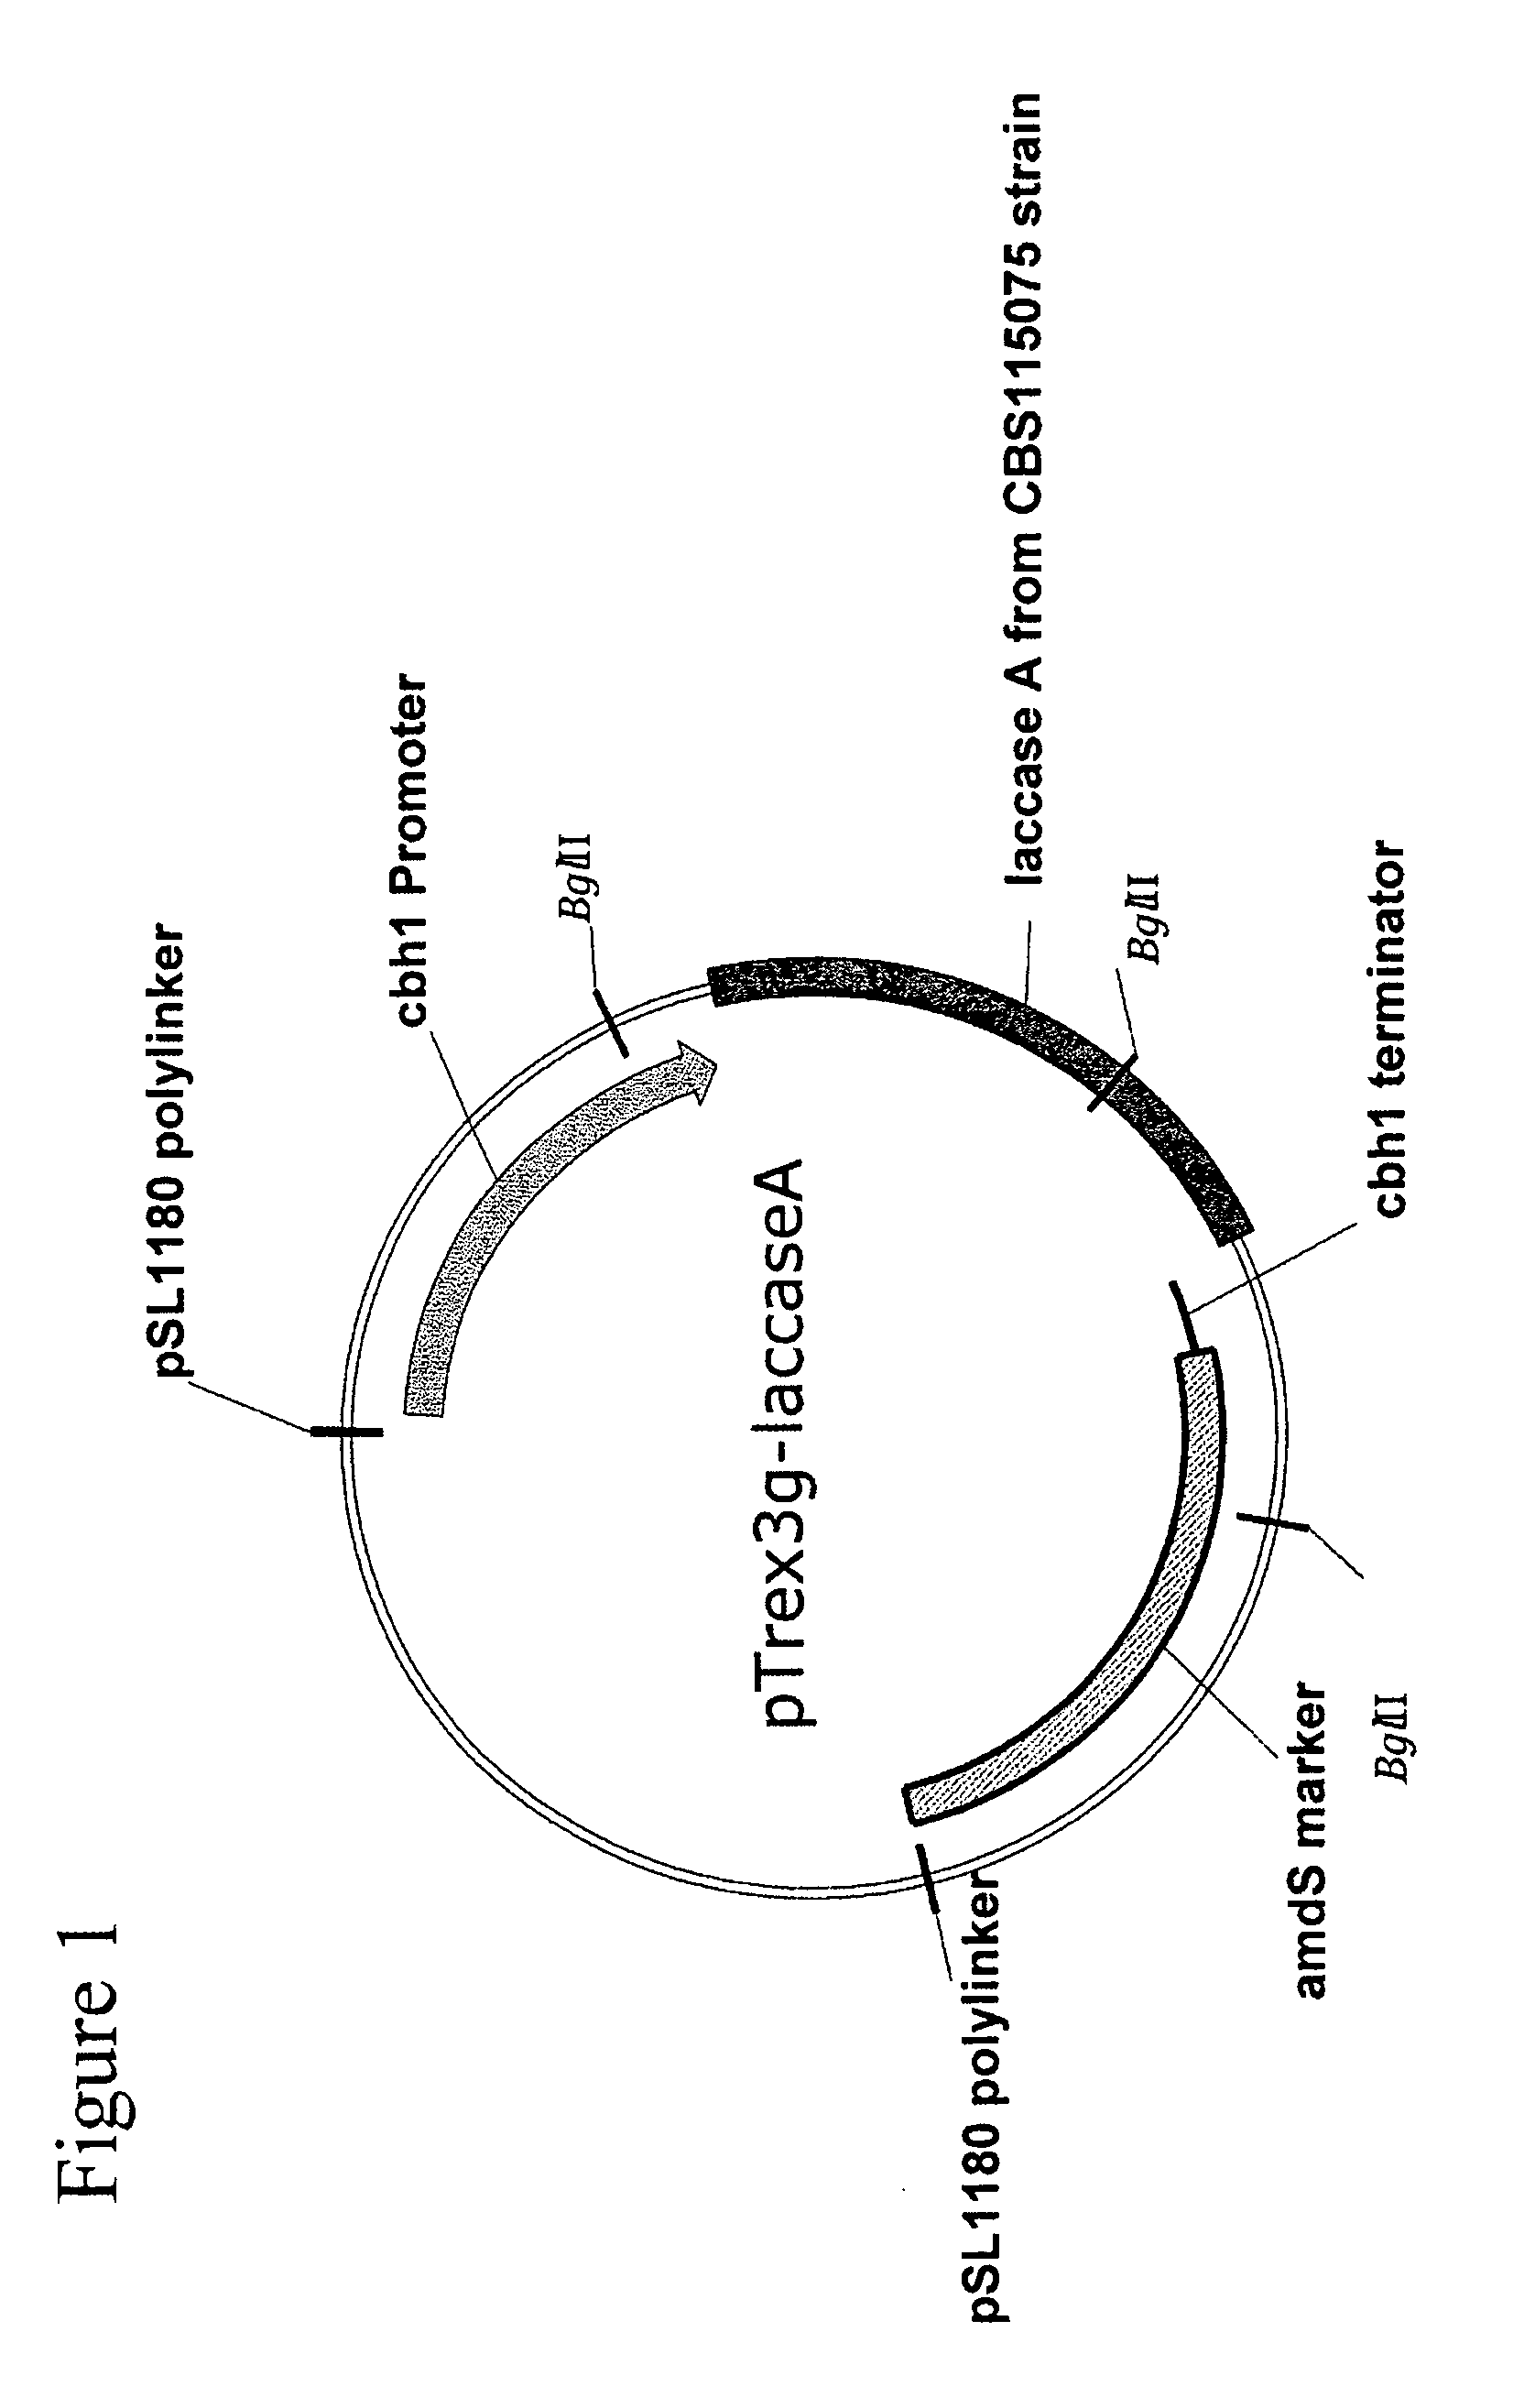 Novel Laccases, Compositions And Methods of Use